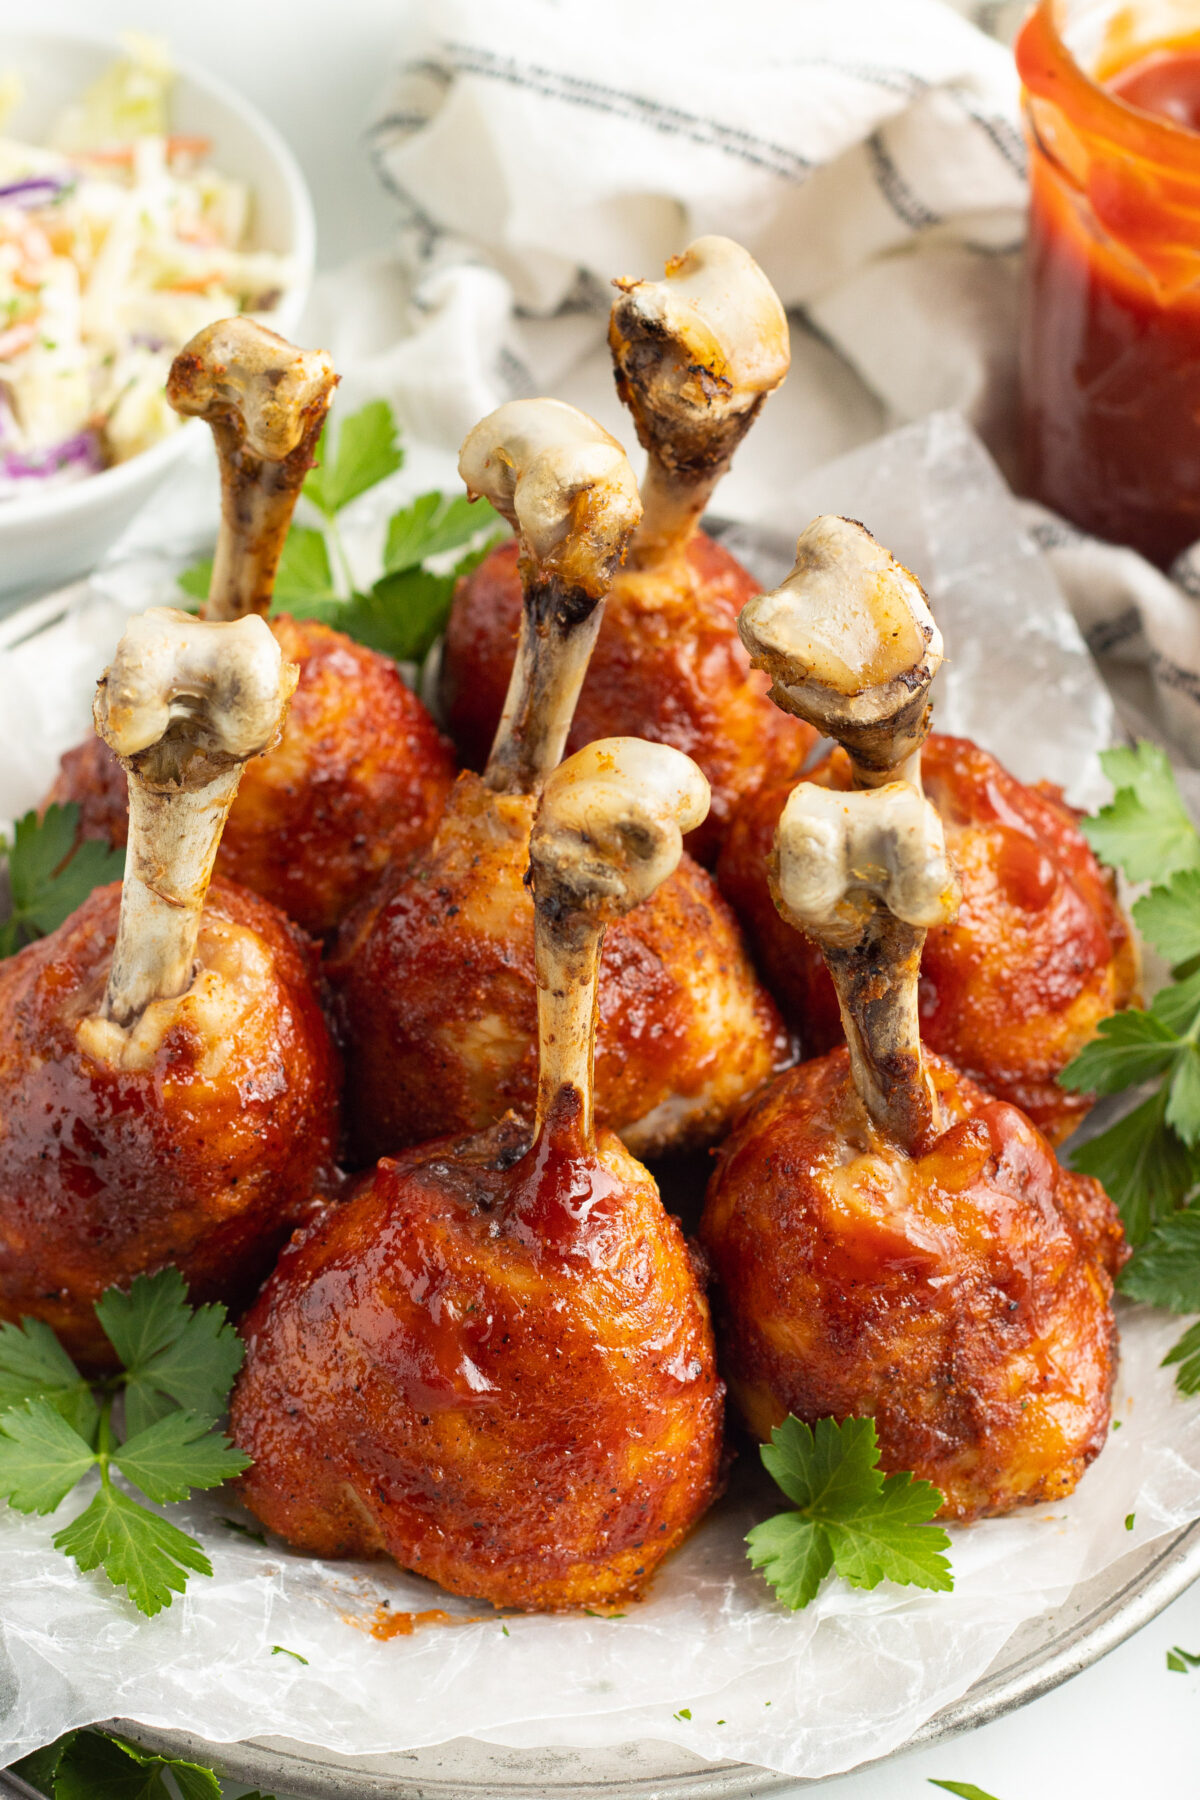 Overhead, angled view of lollipop chicken legs standing upright on a plate.